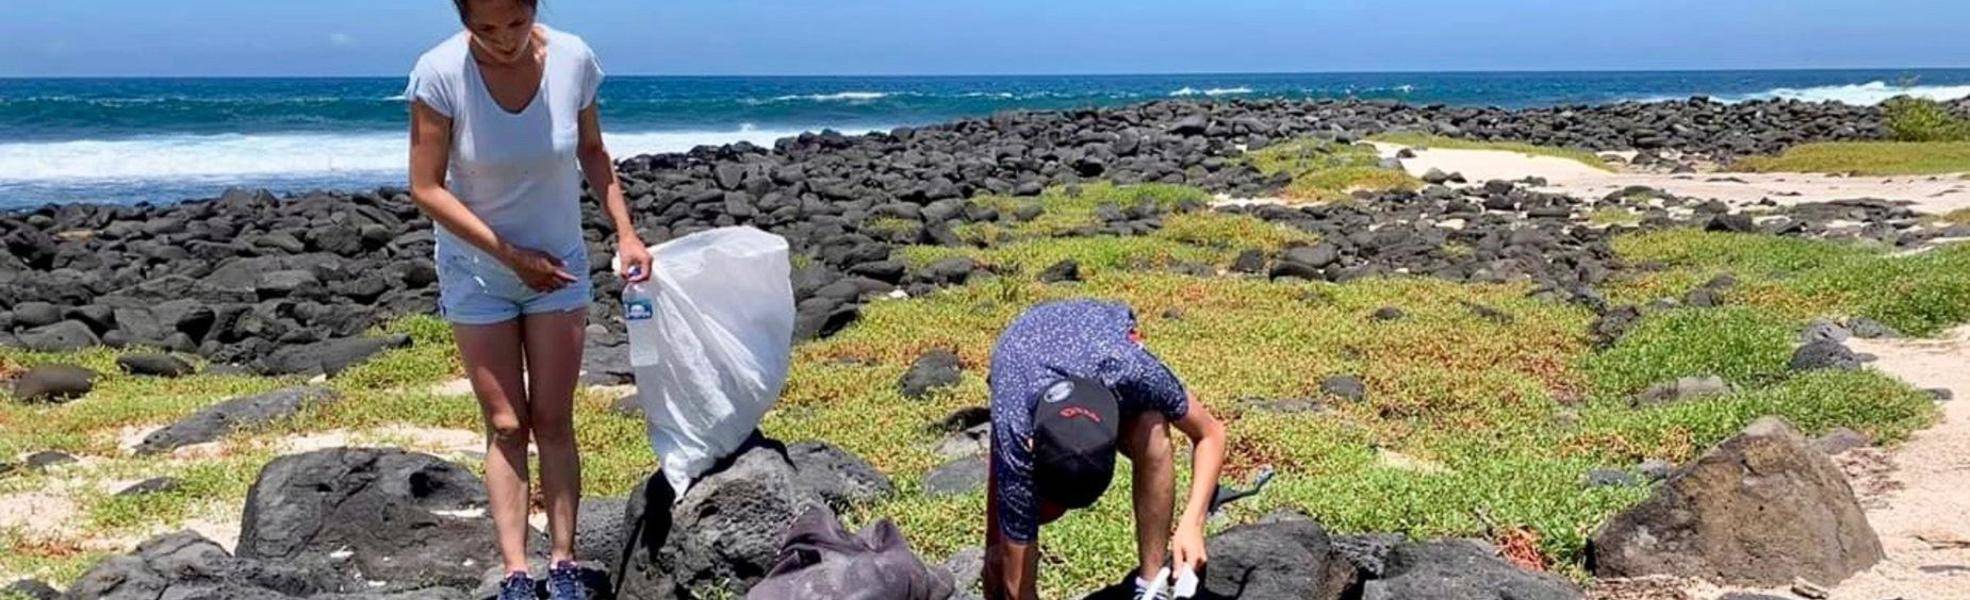 Plastic-free Galápagos - environmental protection project